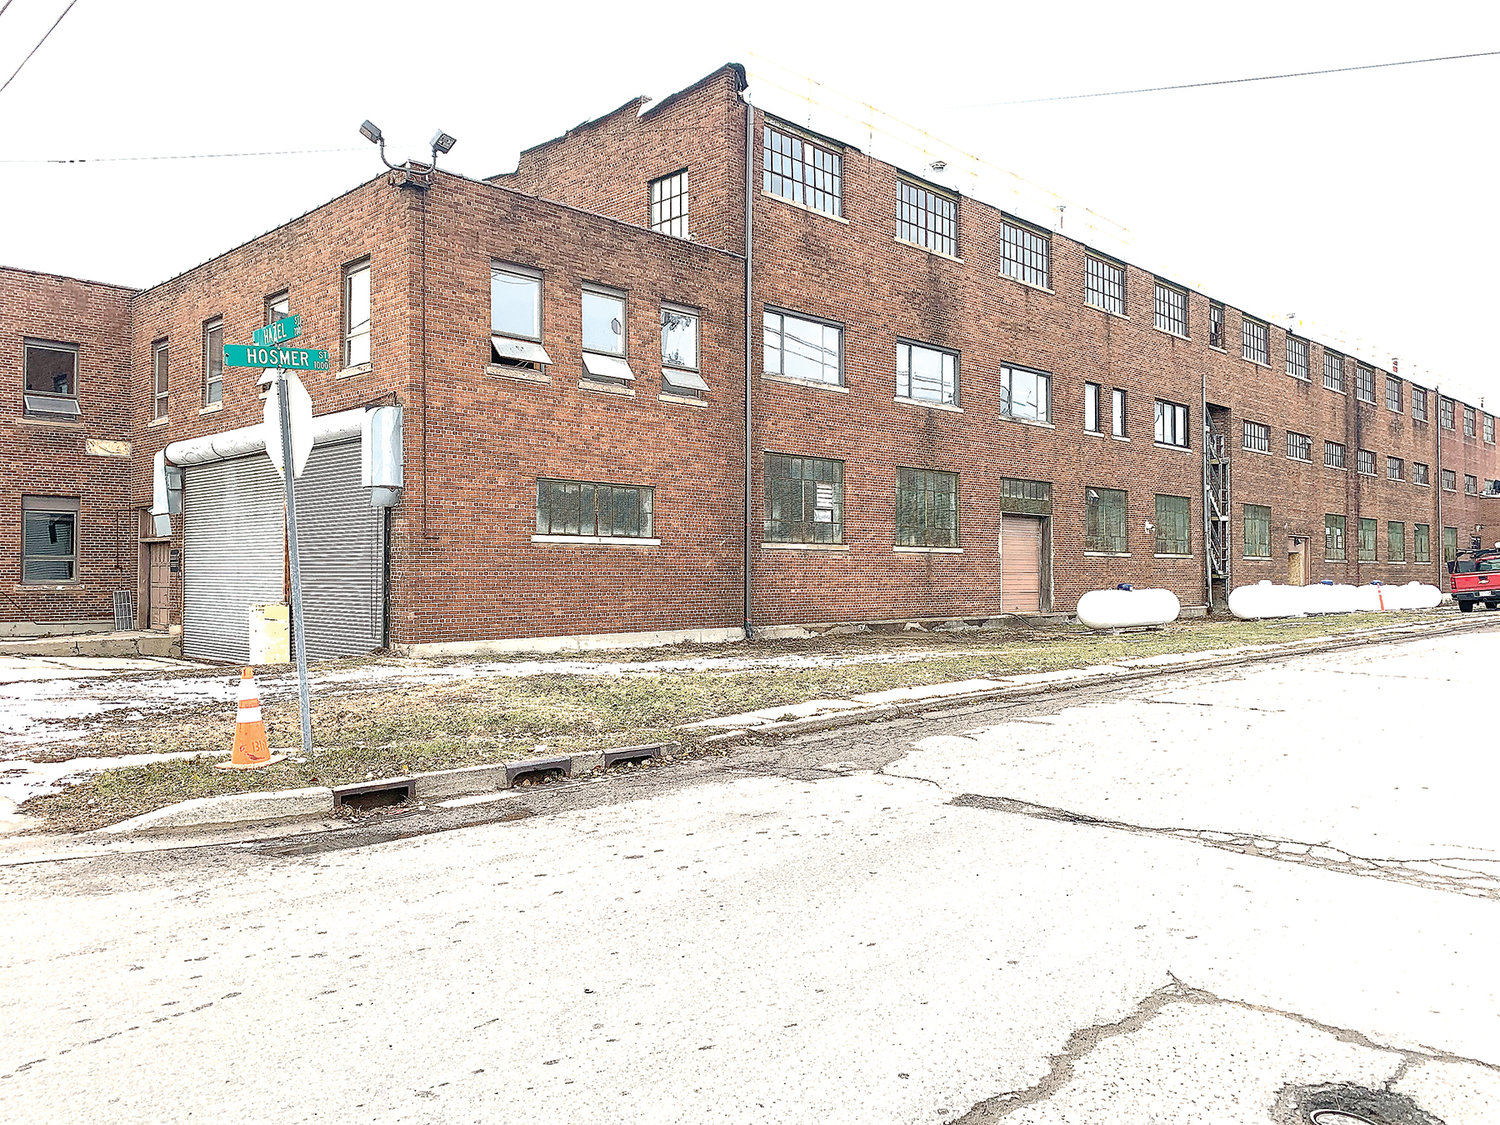 Arbor Farm, the company behind one of the first licensed recreational pot shops in Michigan, is in the midst of renovating a 144,000-square-foot industrial space to house up to 15,000 plants on the corner of Hazel and Hosmer streets.